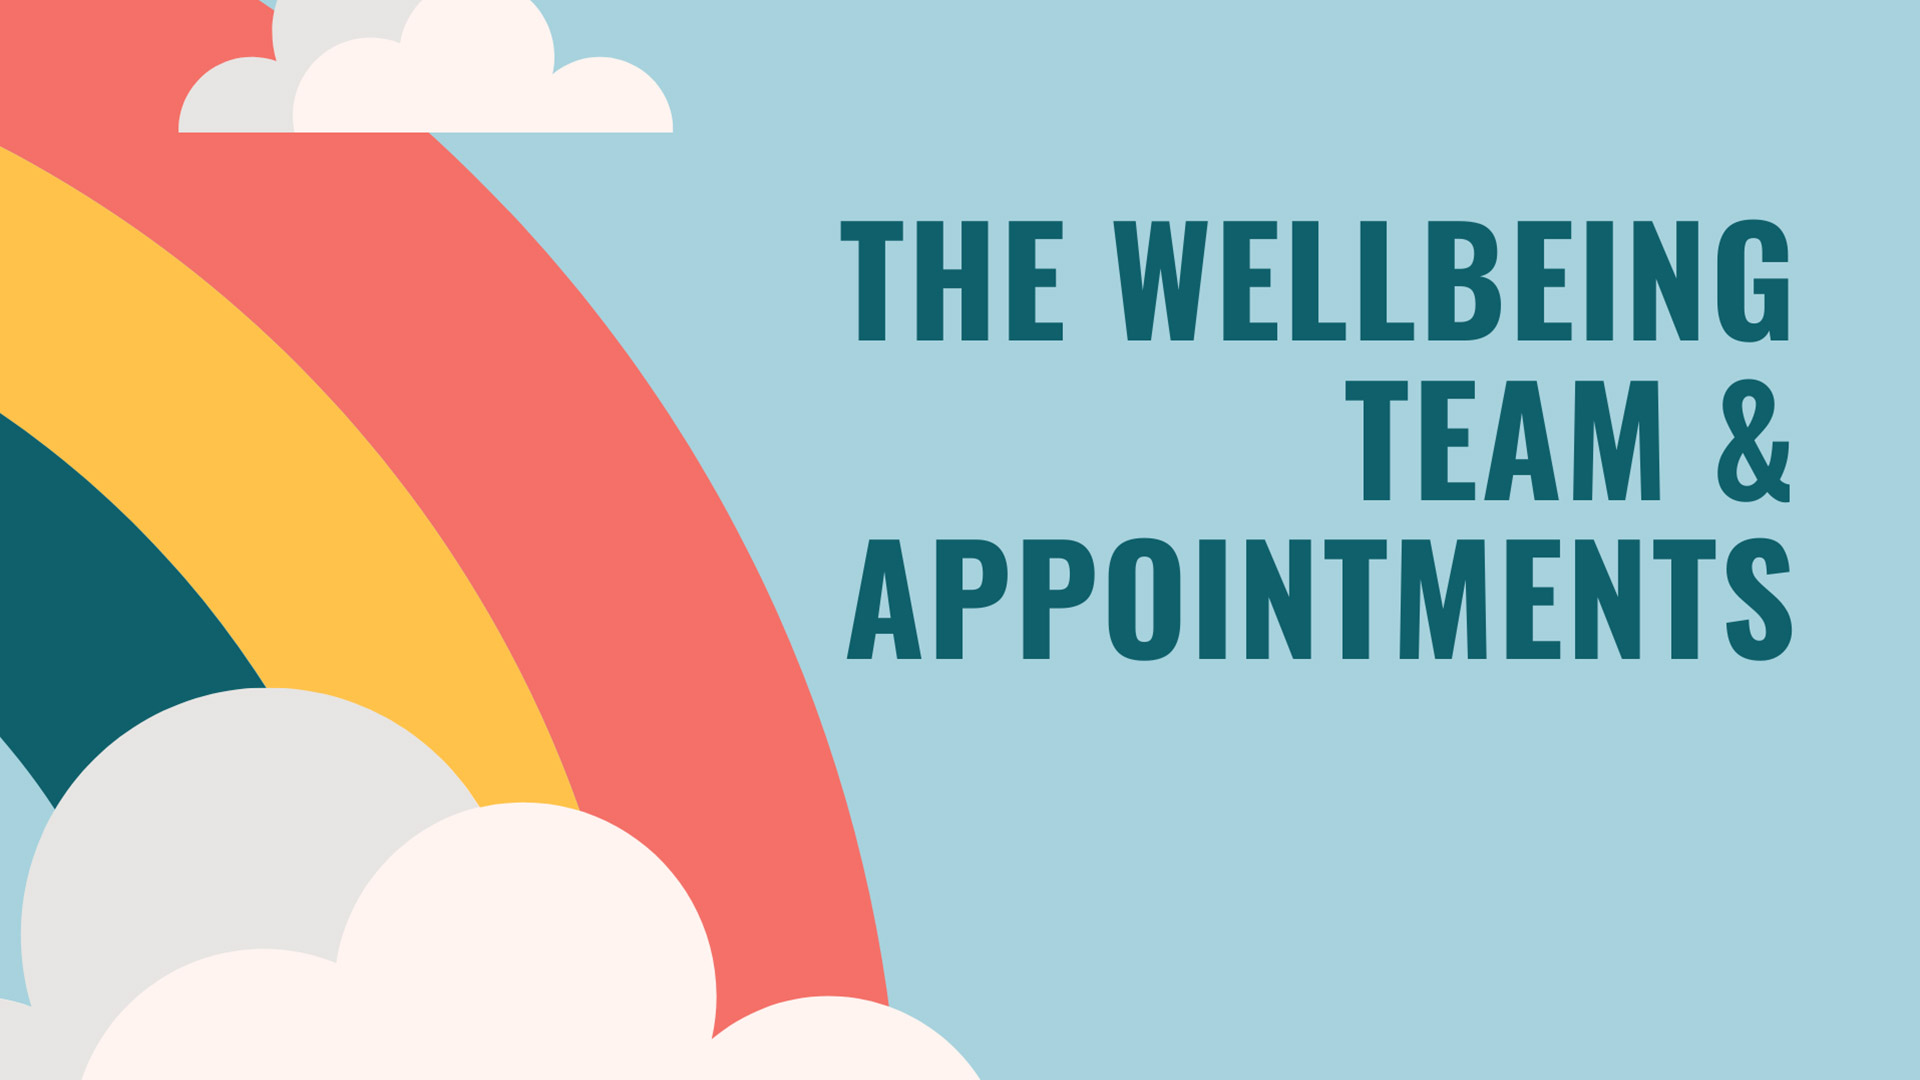 The wellbeing team and appointments